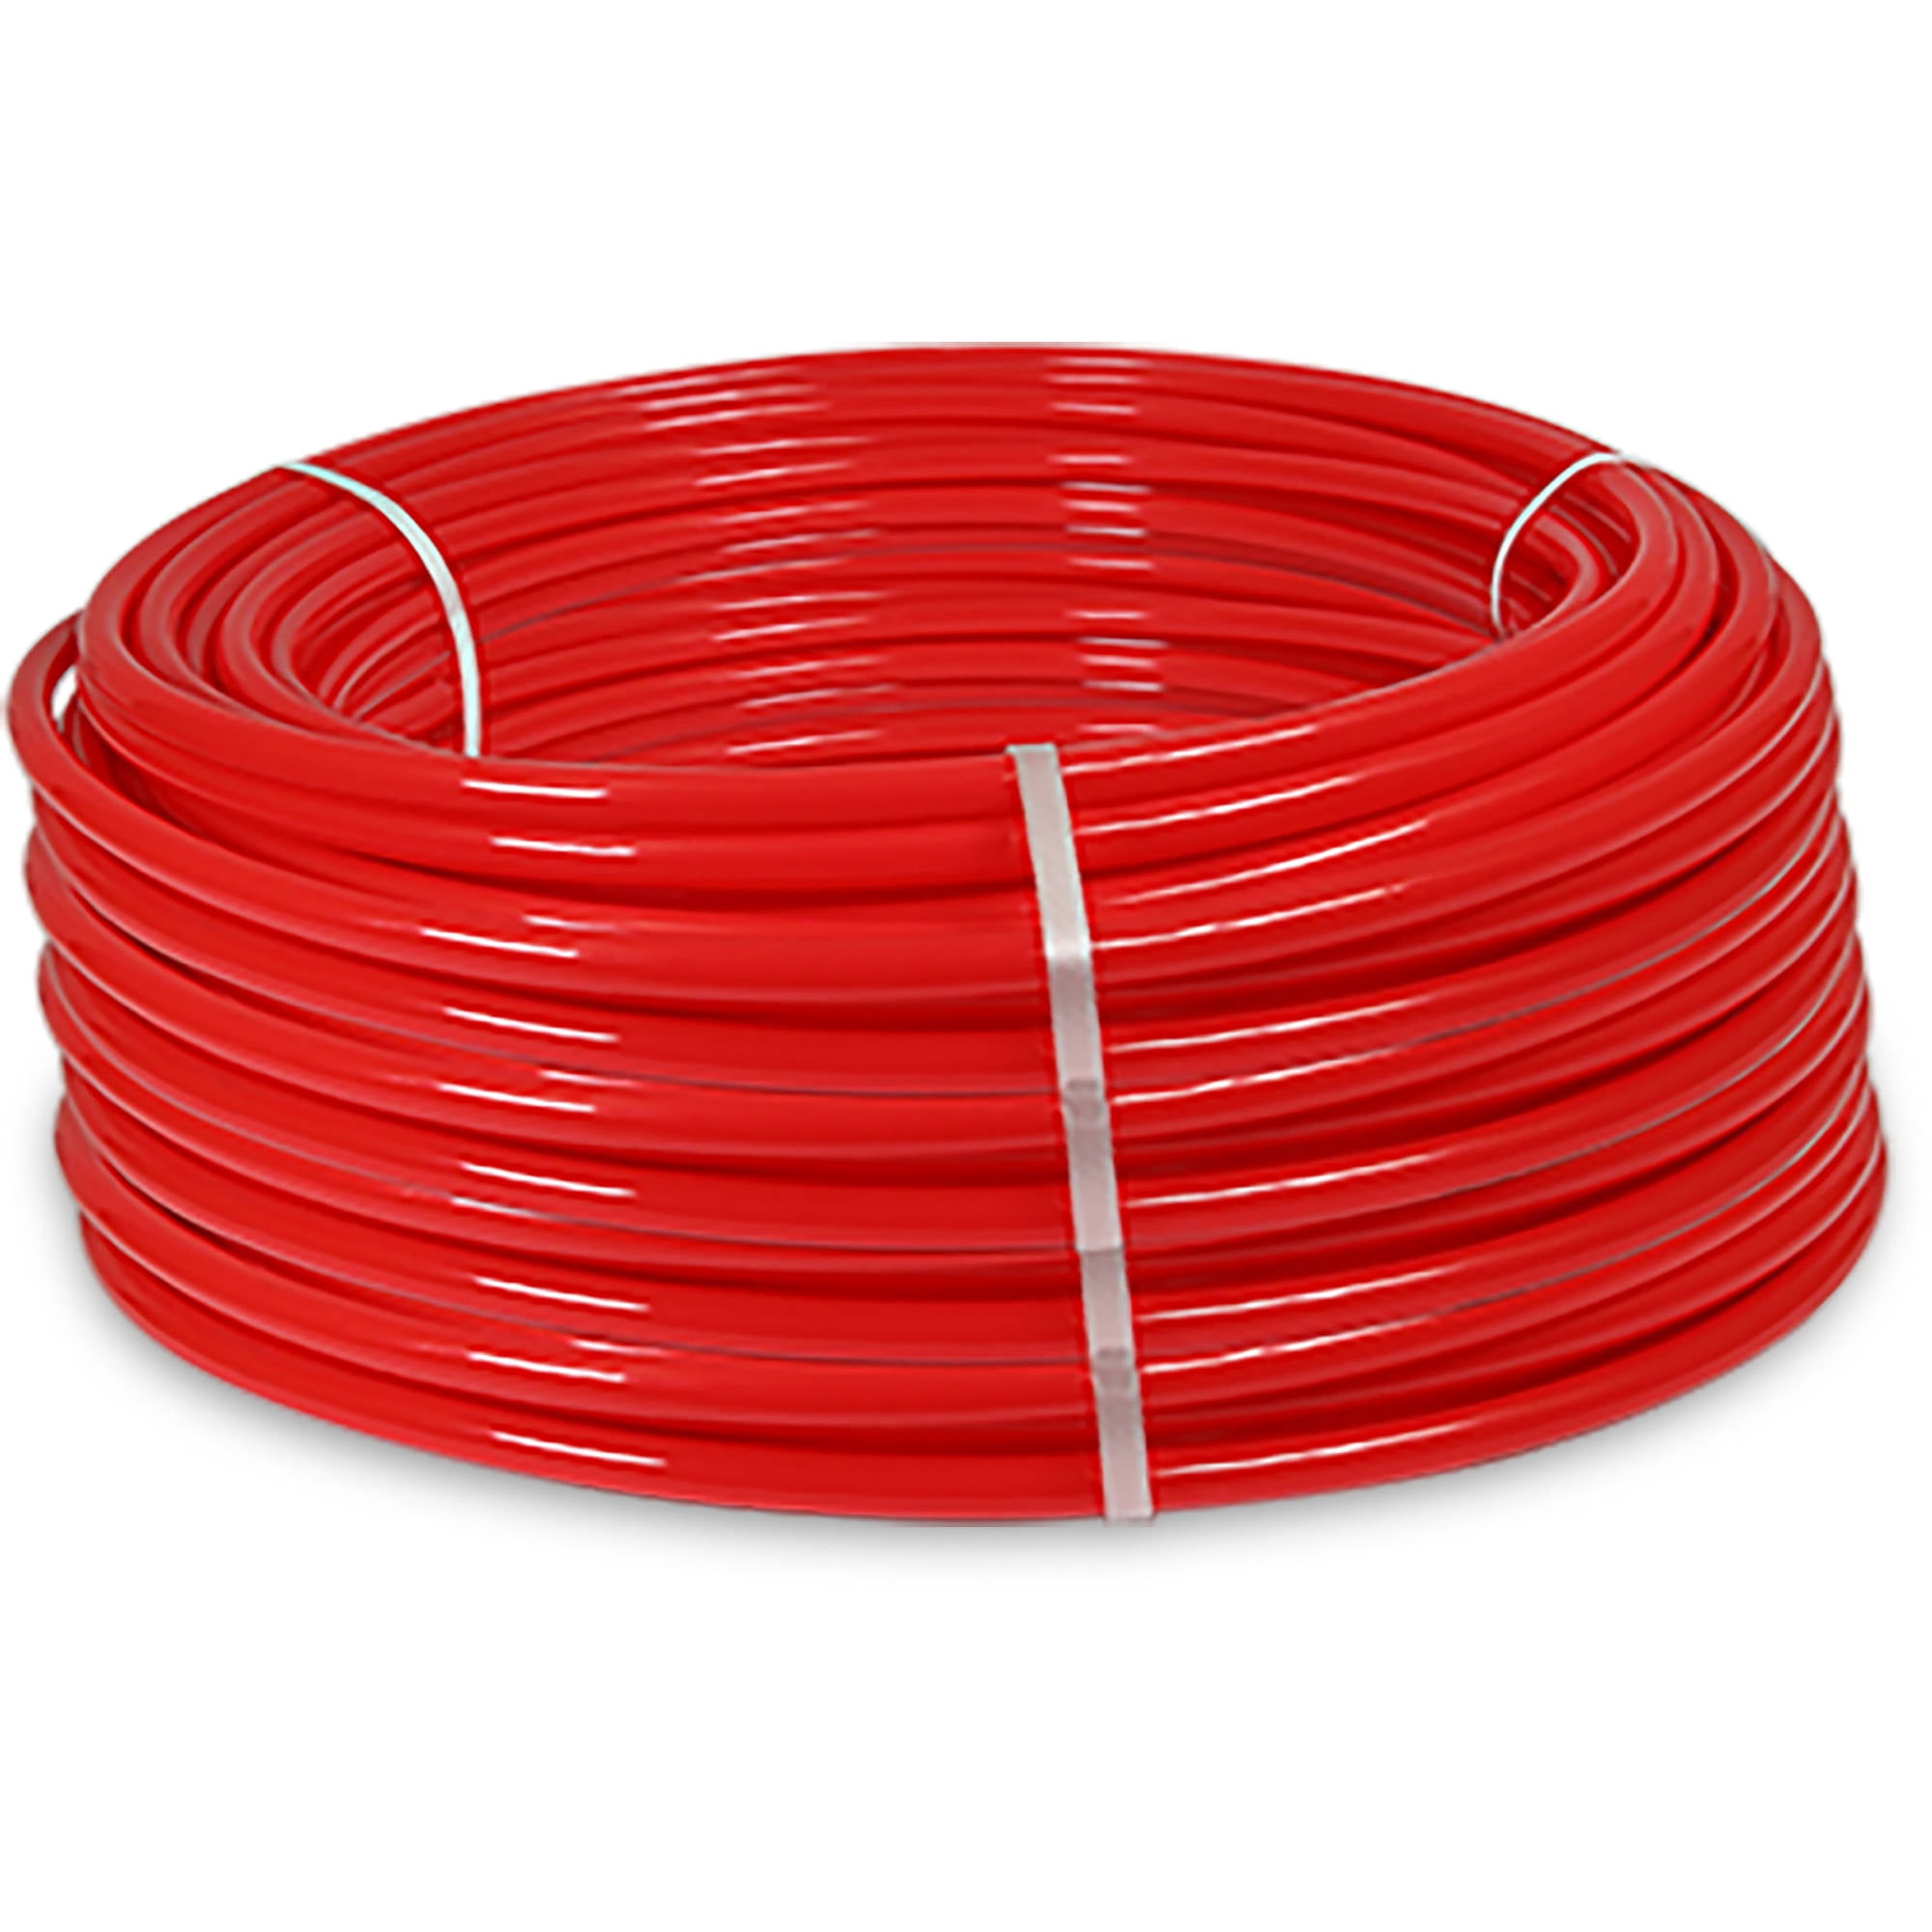 3/4 inch x 500' PEX Tubing/Pipe Non Oxygen Barrier Residential Portable Water 